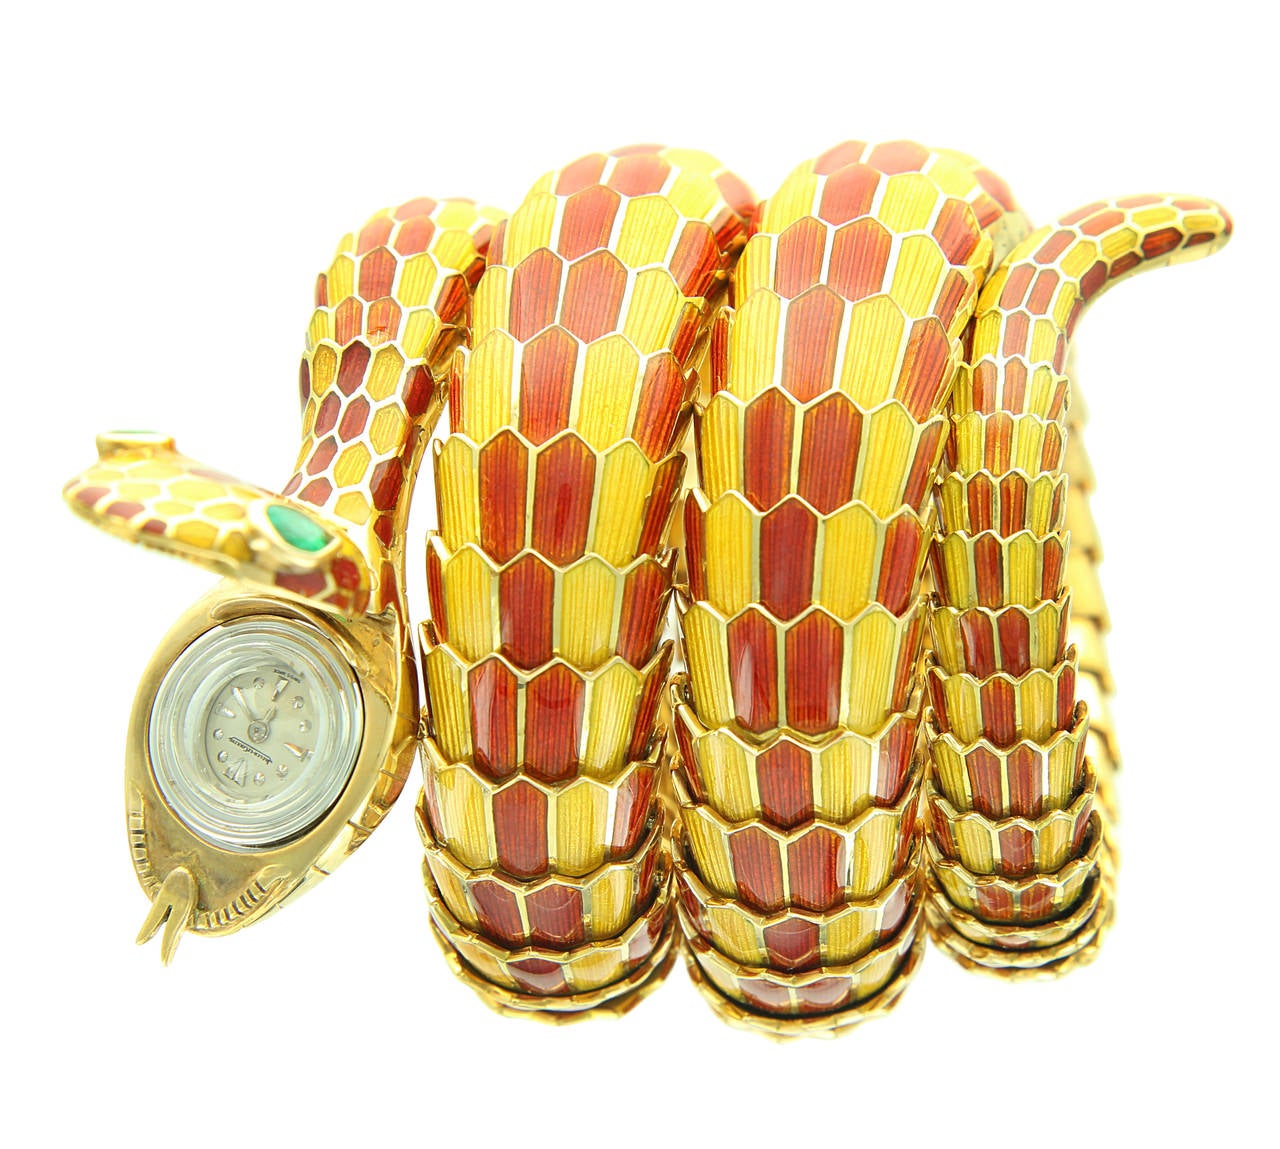 This is a truly spectacular example of the Bulgari Serpenti model. A triple coiled enamel snake with rich orange and yellow scales come to a head featuring emerald eyes and a Jaeger-LeCoultre watch inside the mouth. The head is stamped 